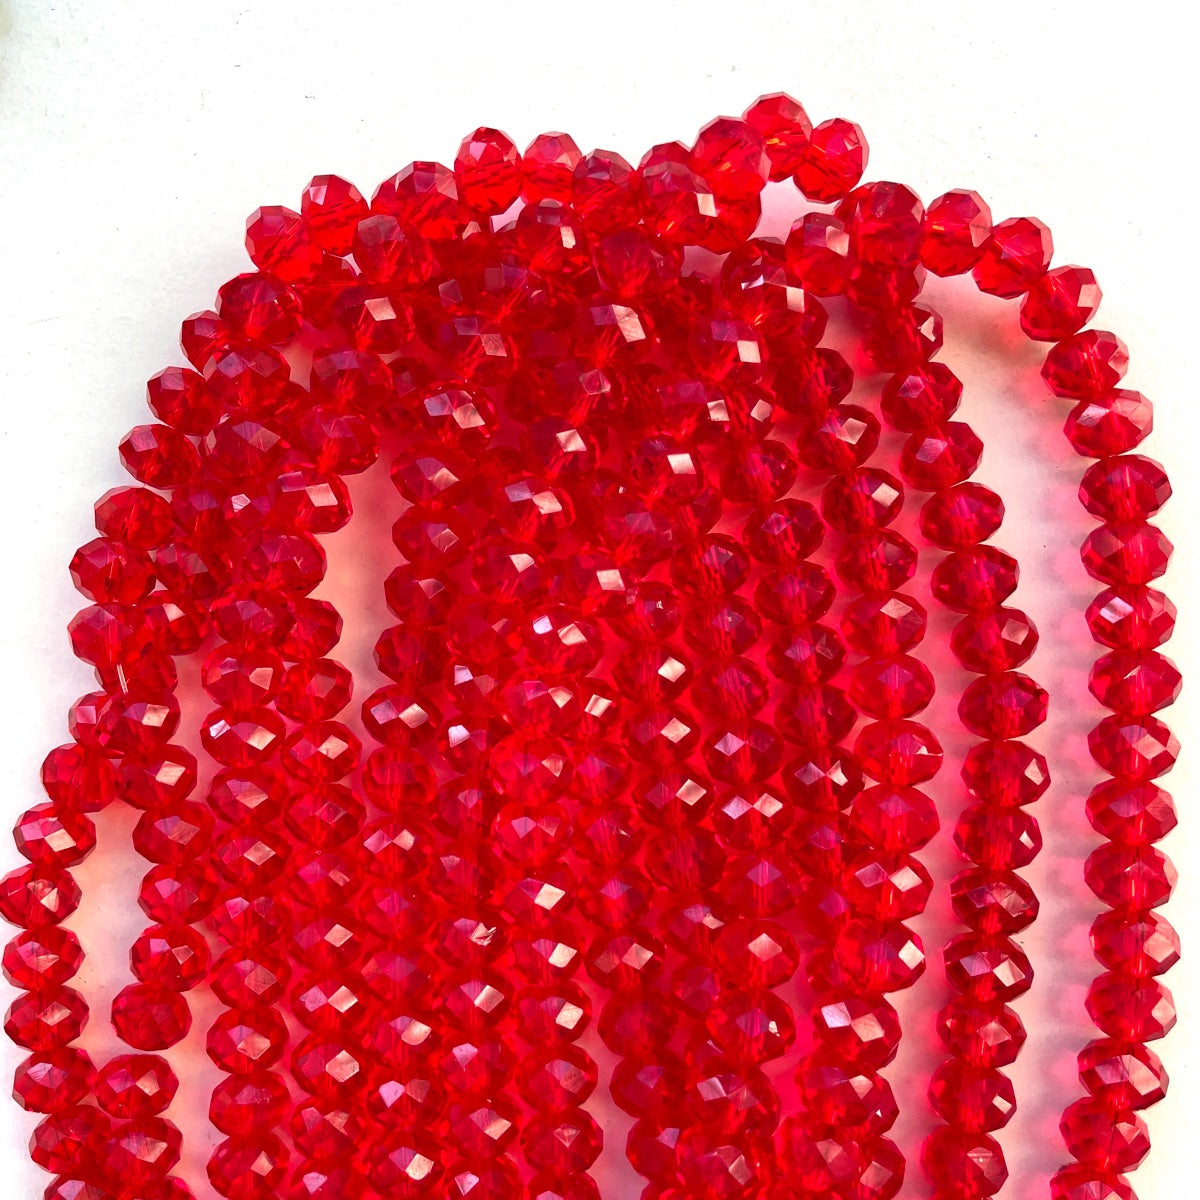 2 Strands/lot 10mm Clear Red Faceted Glass Beads Glass Beads Faceted Glass Beads Charms Beads Beyond